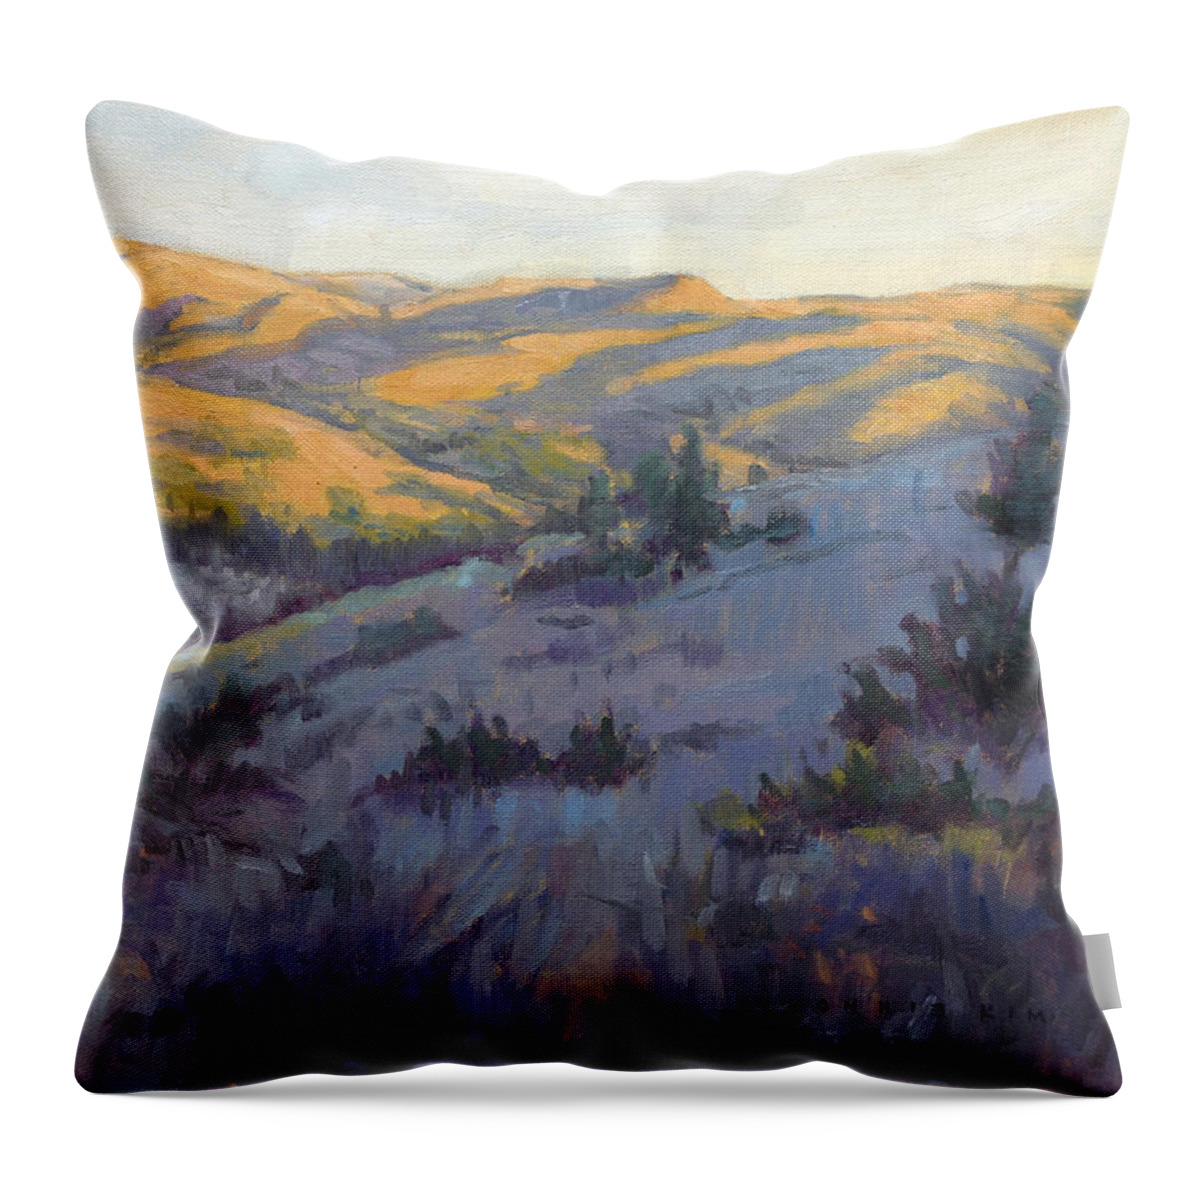 Santiago Oaks Regional Park Throw Pillow featuring the painting Golden Trail by Konnie Kim